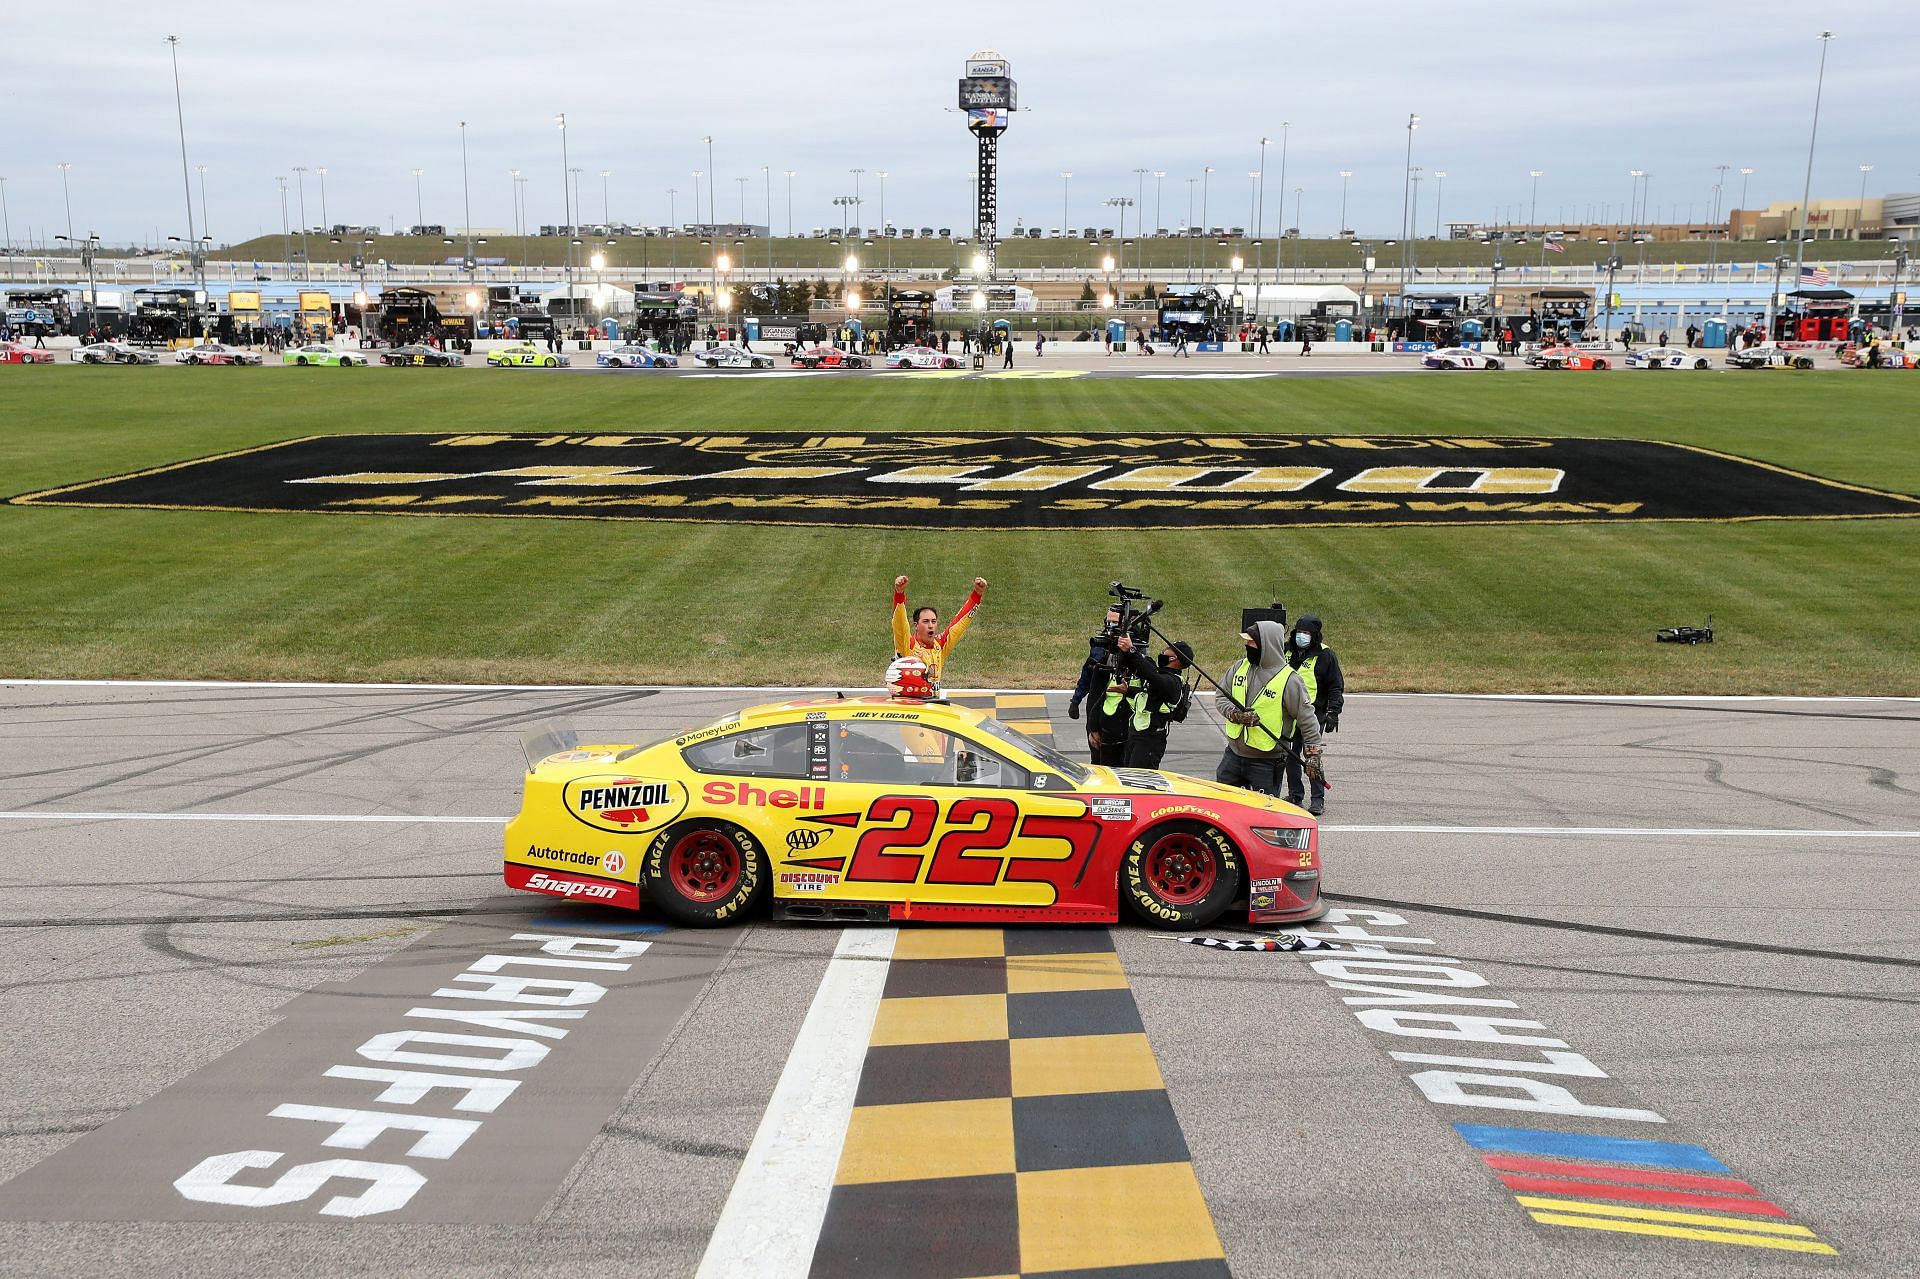 Joey Logano celebrates after winning the 2020 NASCAR Cup Series Hollywood Casino 400 at Kansas Speedway in Kansas City, Kansas (Photo by Jamie Squire/Getty Images)